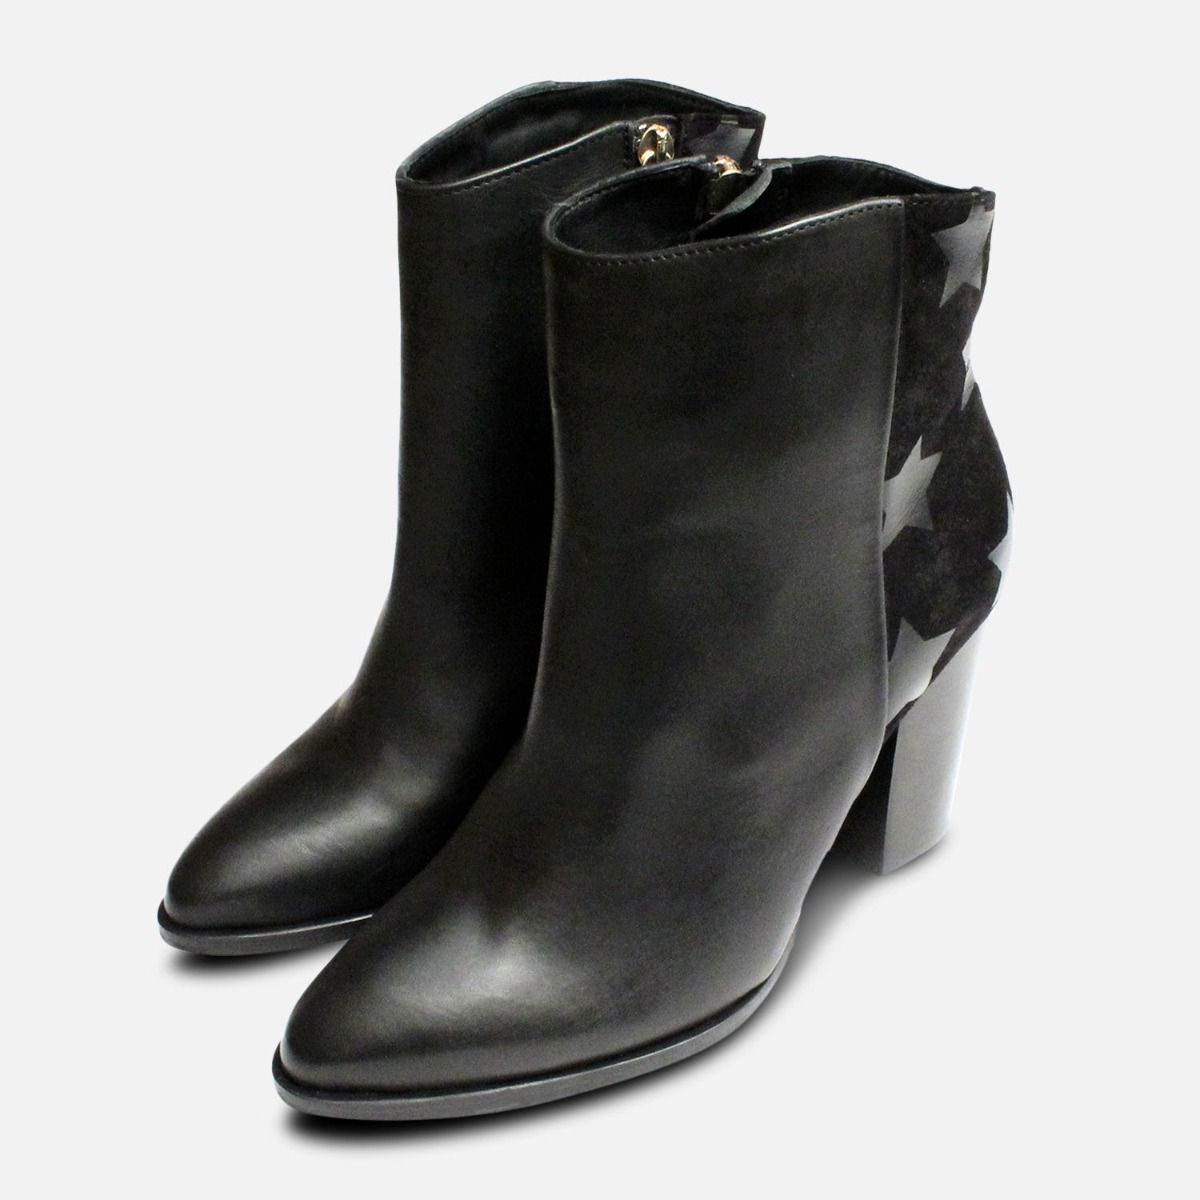 black stacked heel ankle boot